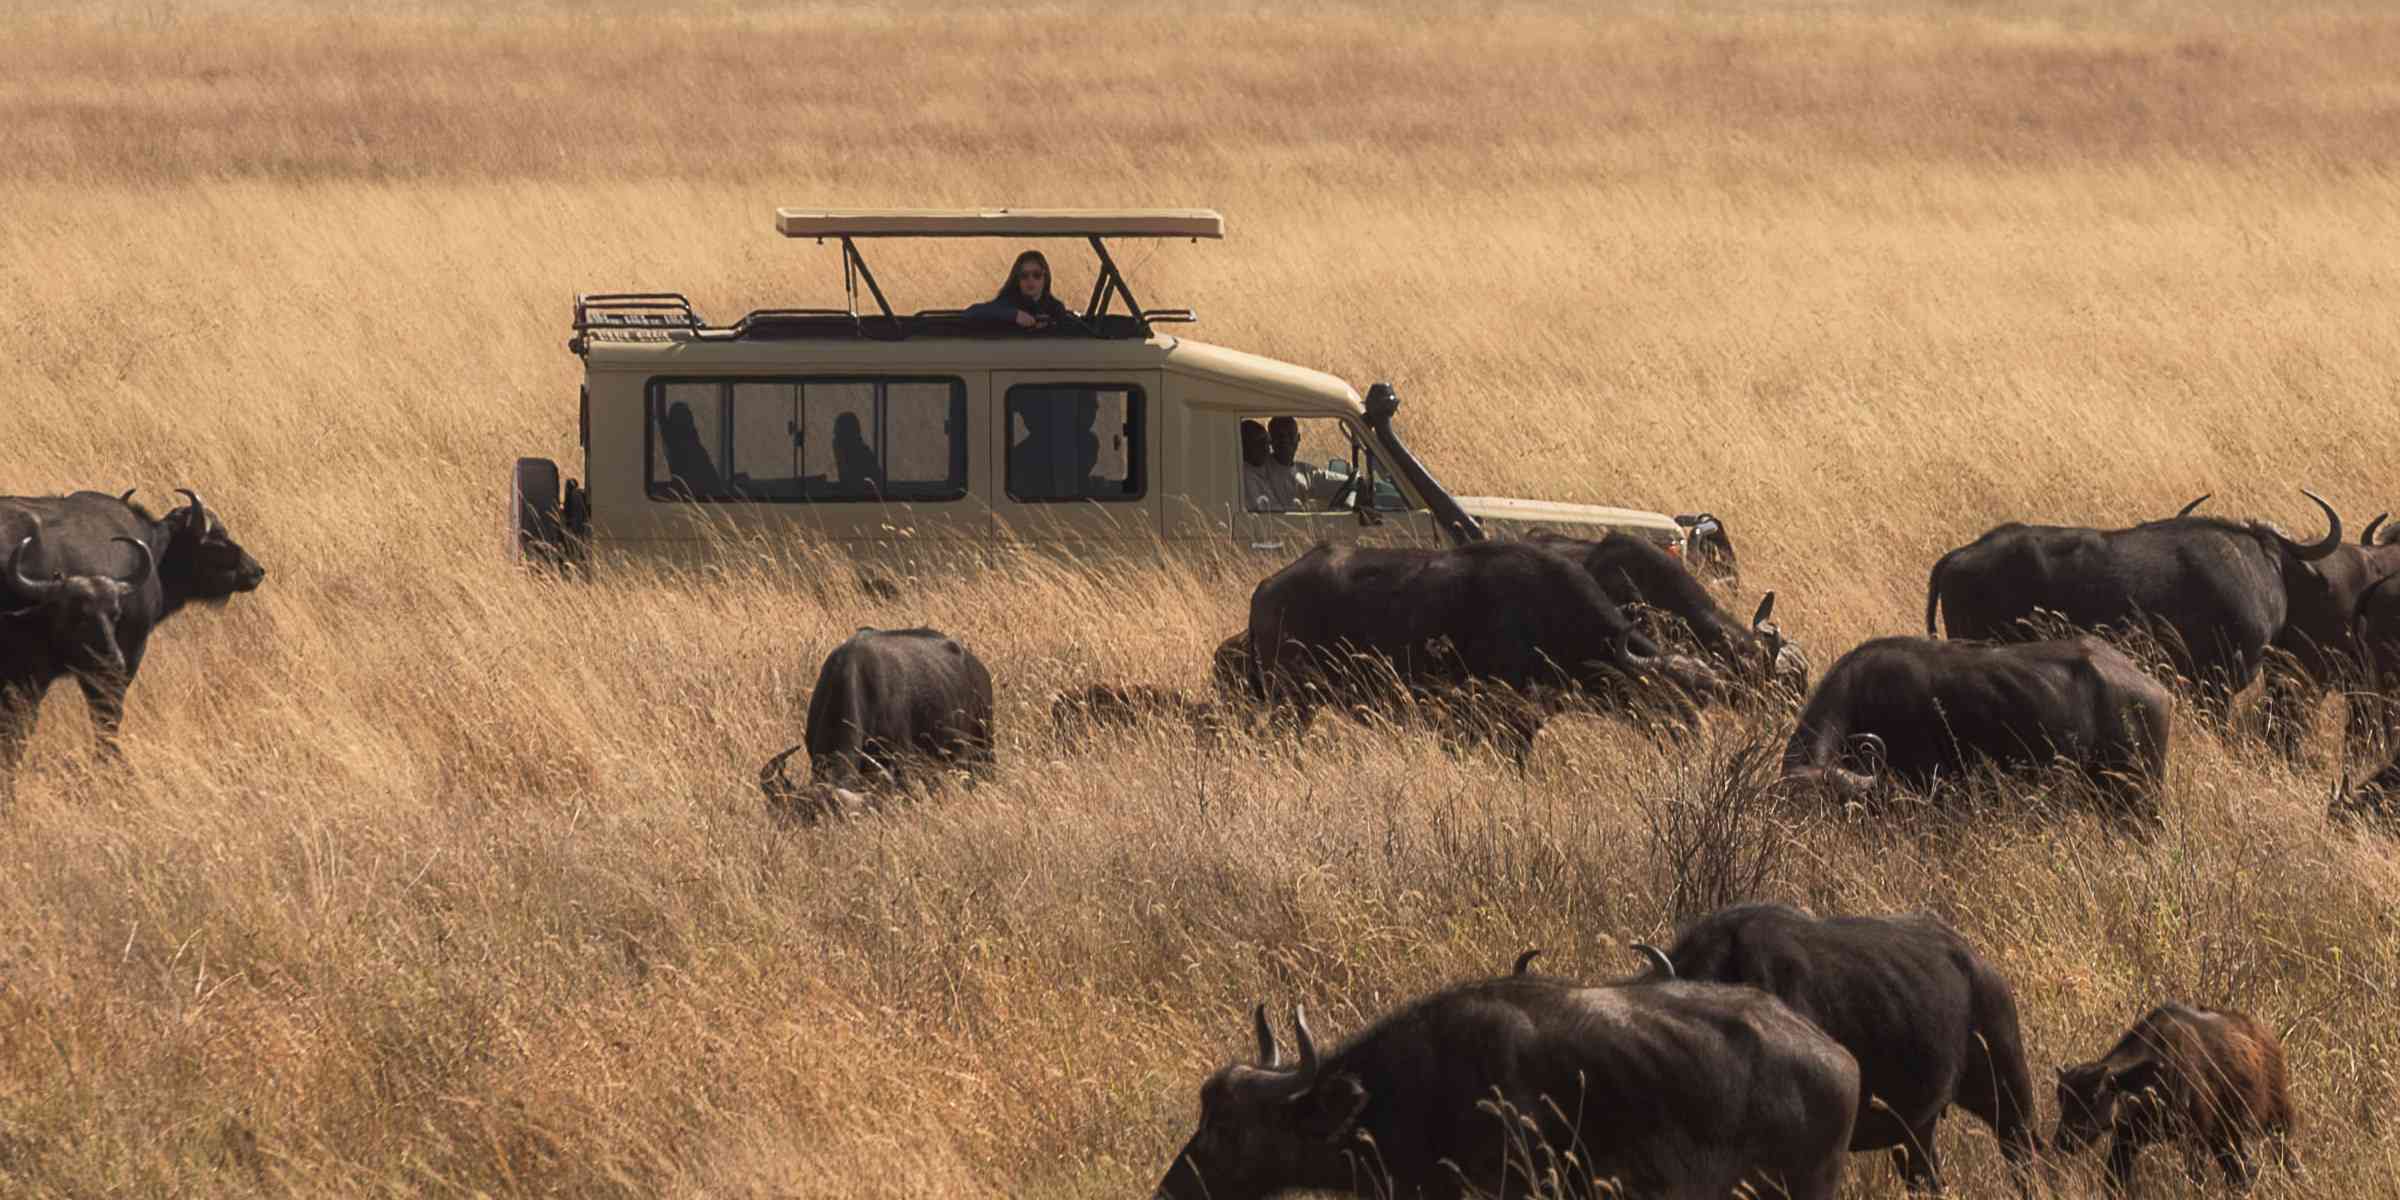 No Safari Is Complete Without a Night Game Drive—Here Are 10 of